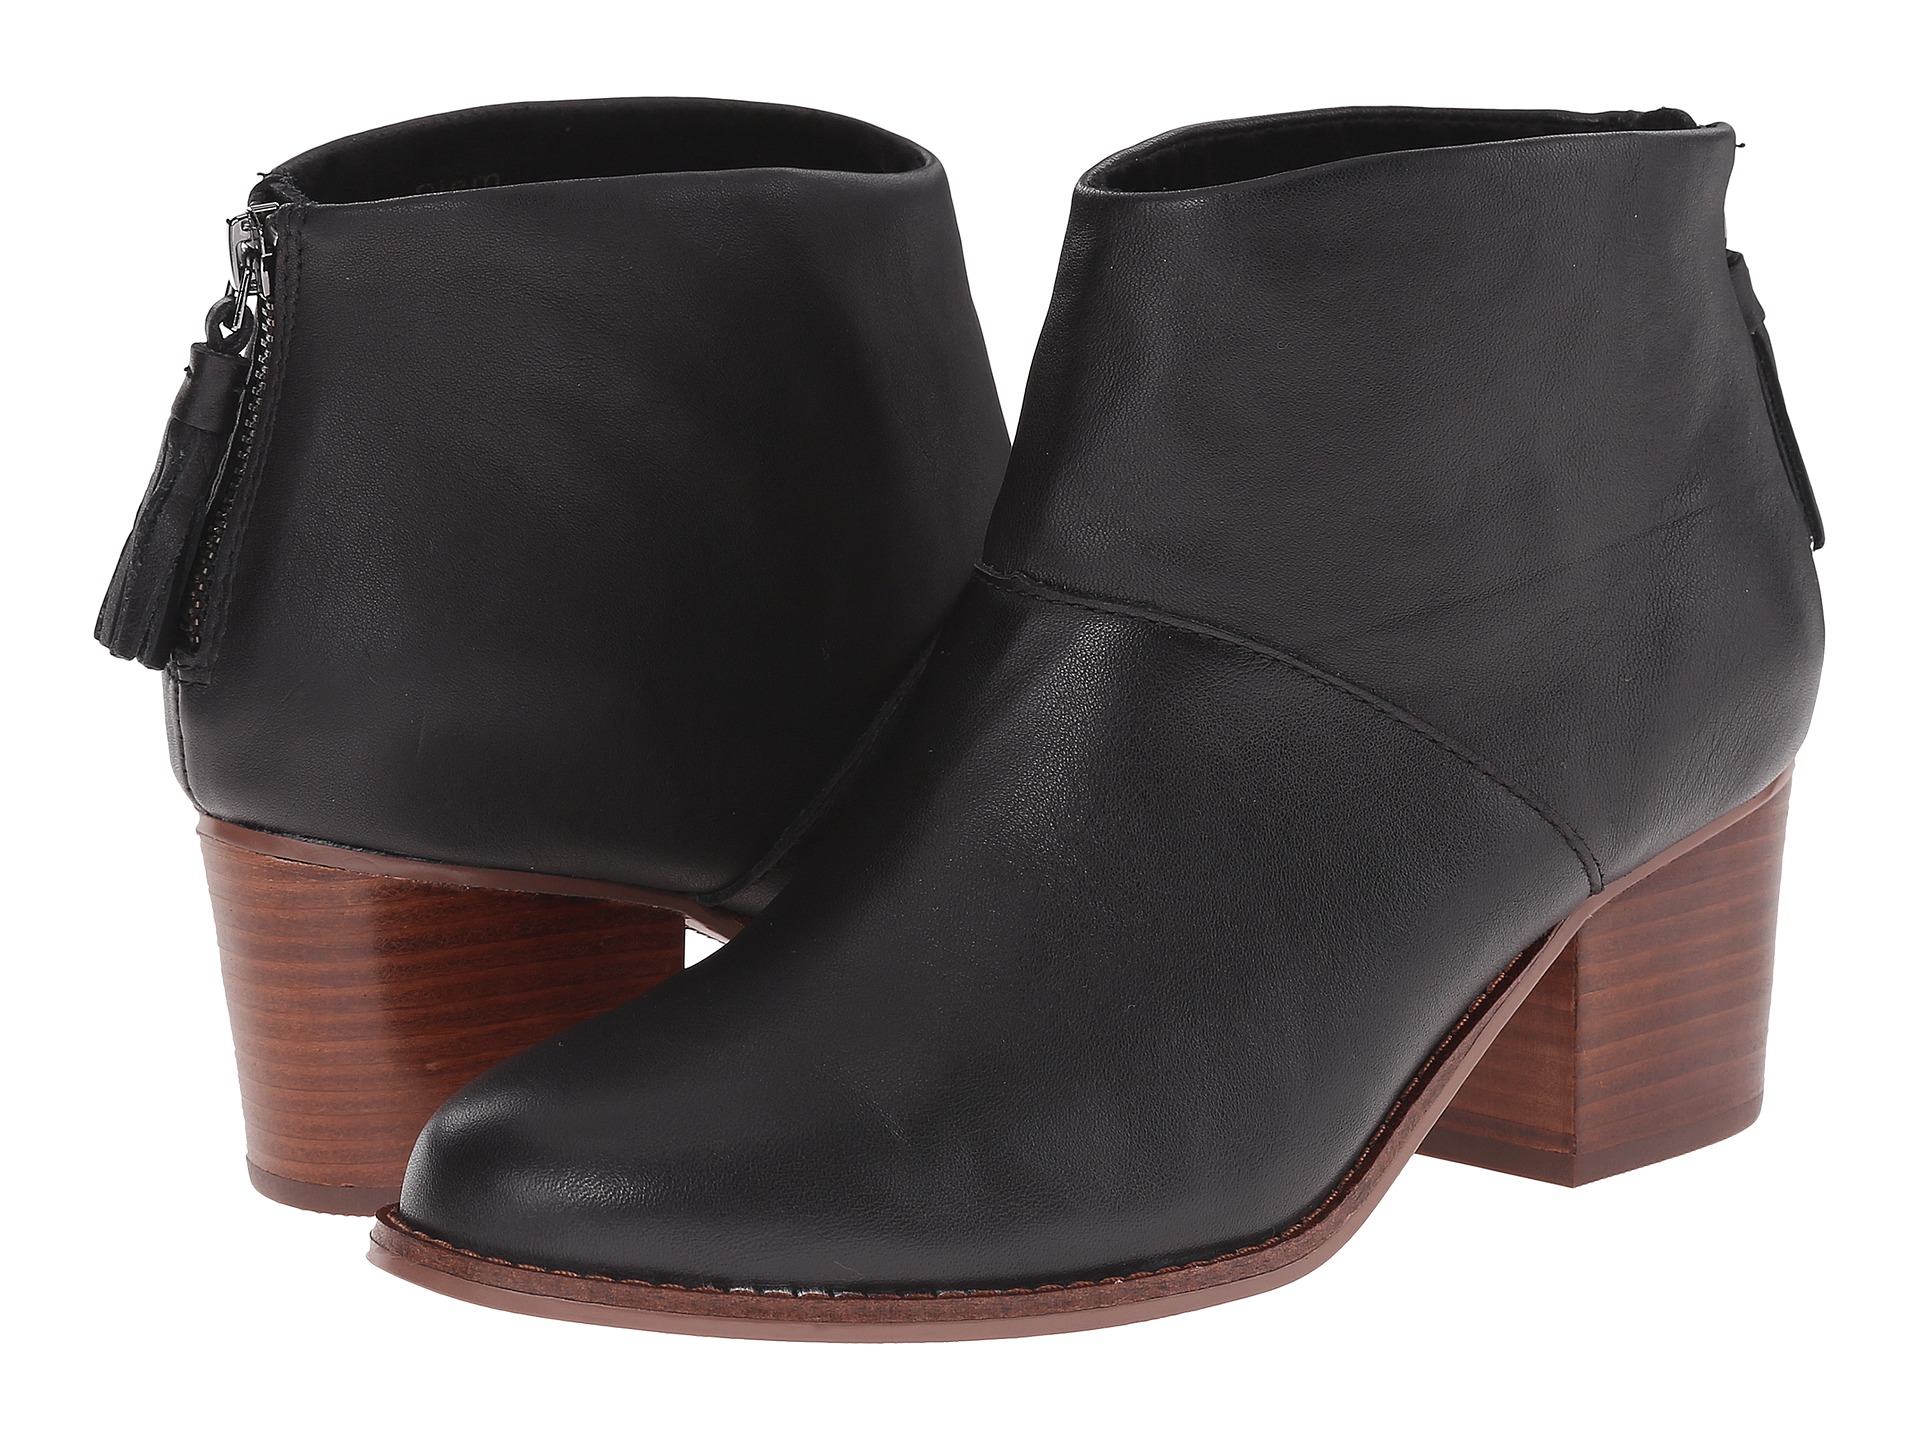 Femmes Nike Xcellerator - TOMS Leila Bootie - Zappos.com Free Shipping BOTH Ways